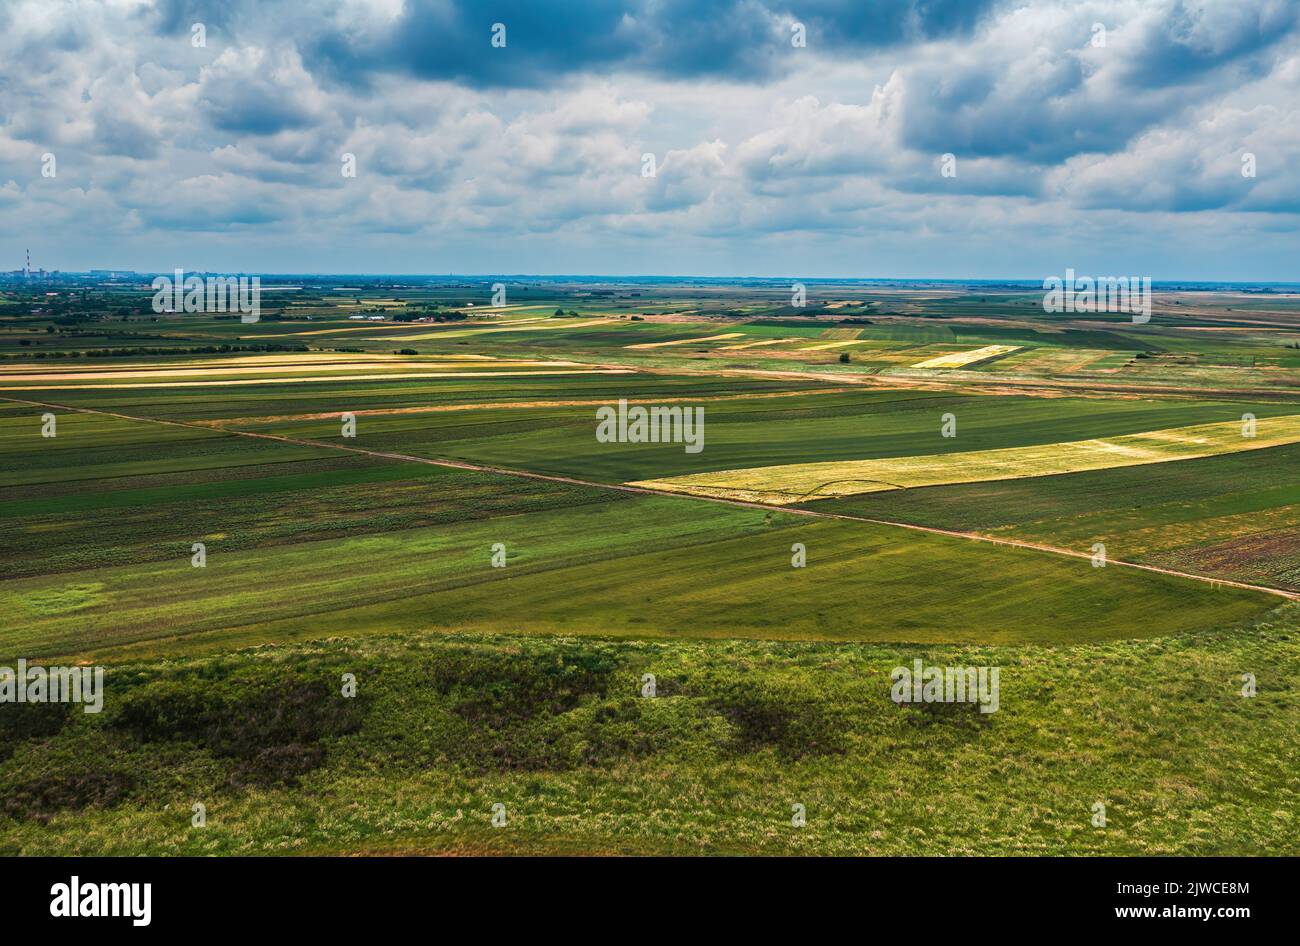 Aerial shot of beautiful countryside landscape with cultivated fields in Banat, geographical region of Vojvodina province in Serbia, drone pov high an Stock Photo